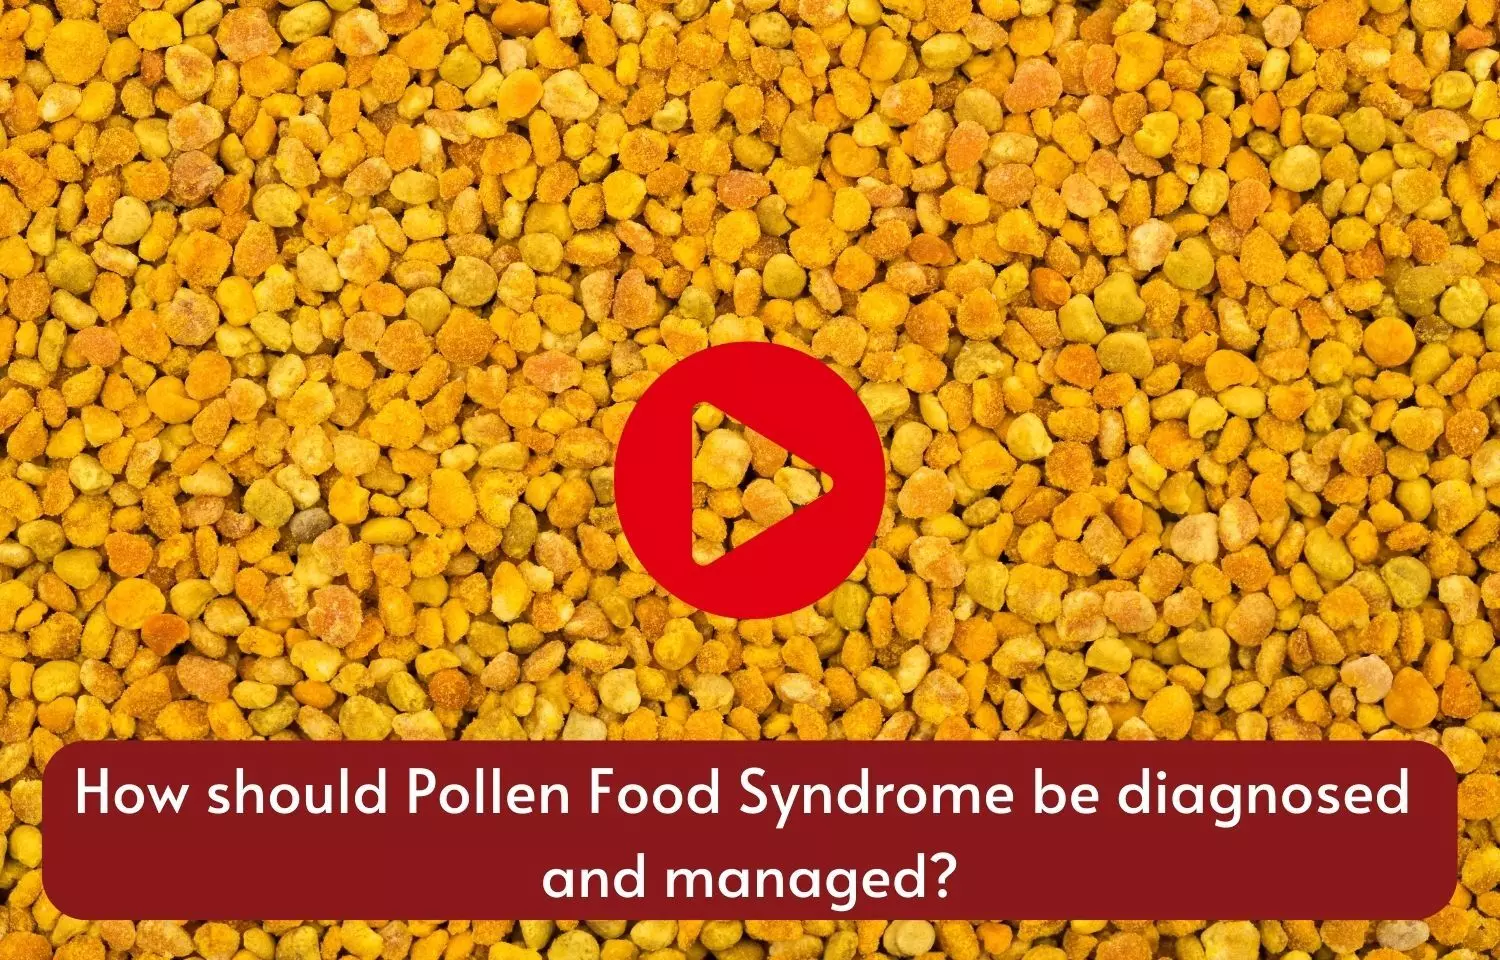 How should Pollen Food Syndrome be diagnosed and managed?